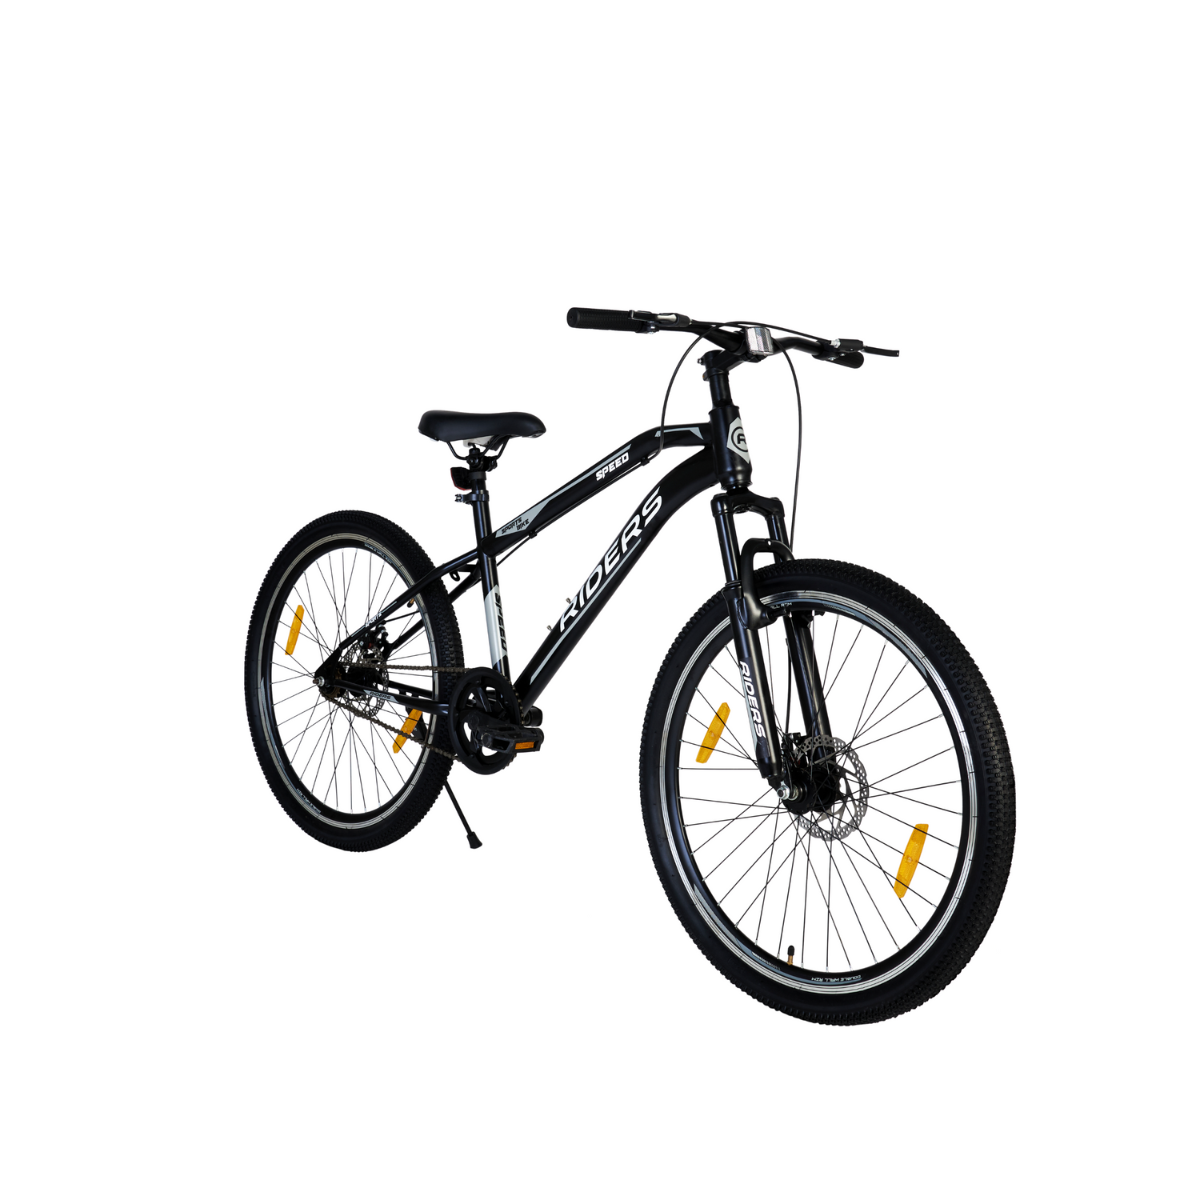 RIDERS® Speed | Size 27.5" | Single Speed | Age 12 + Years